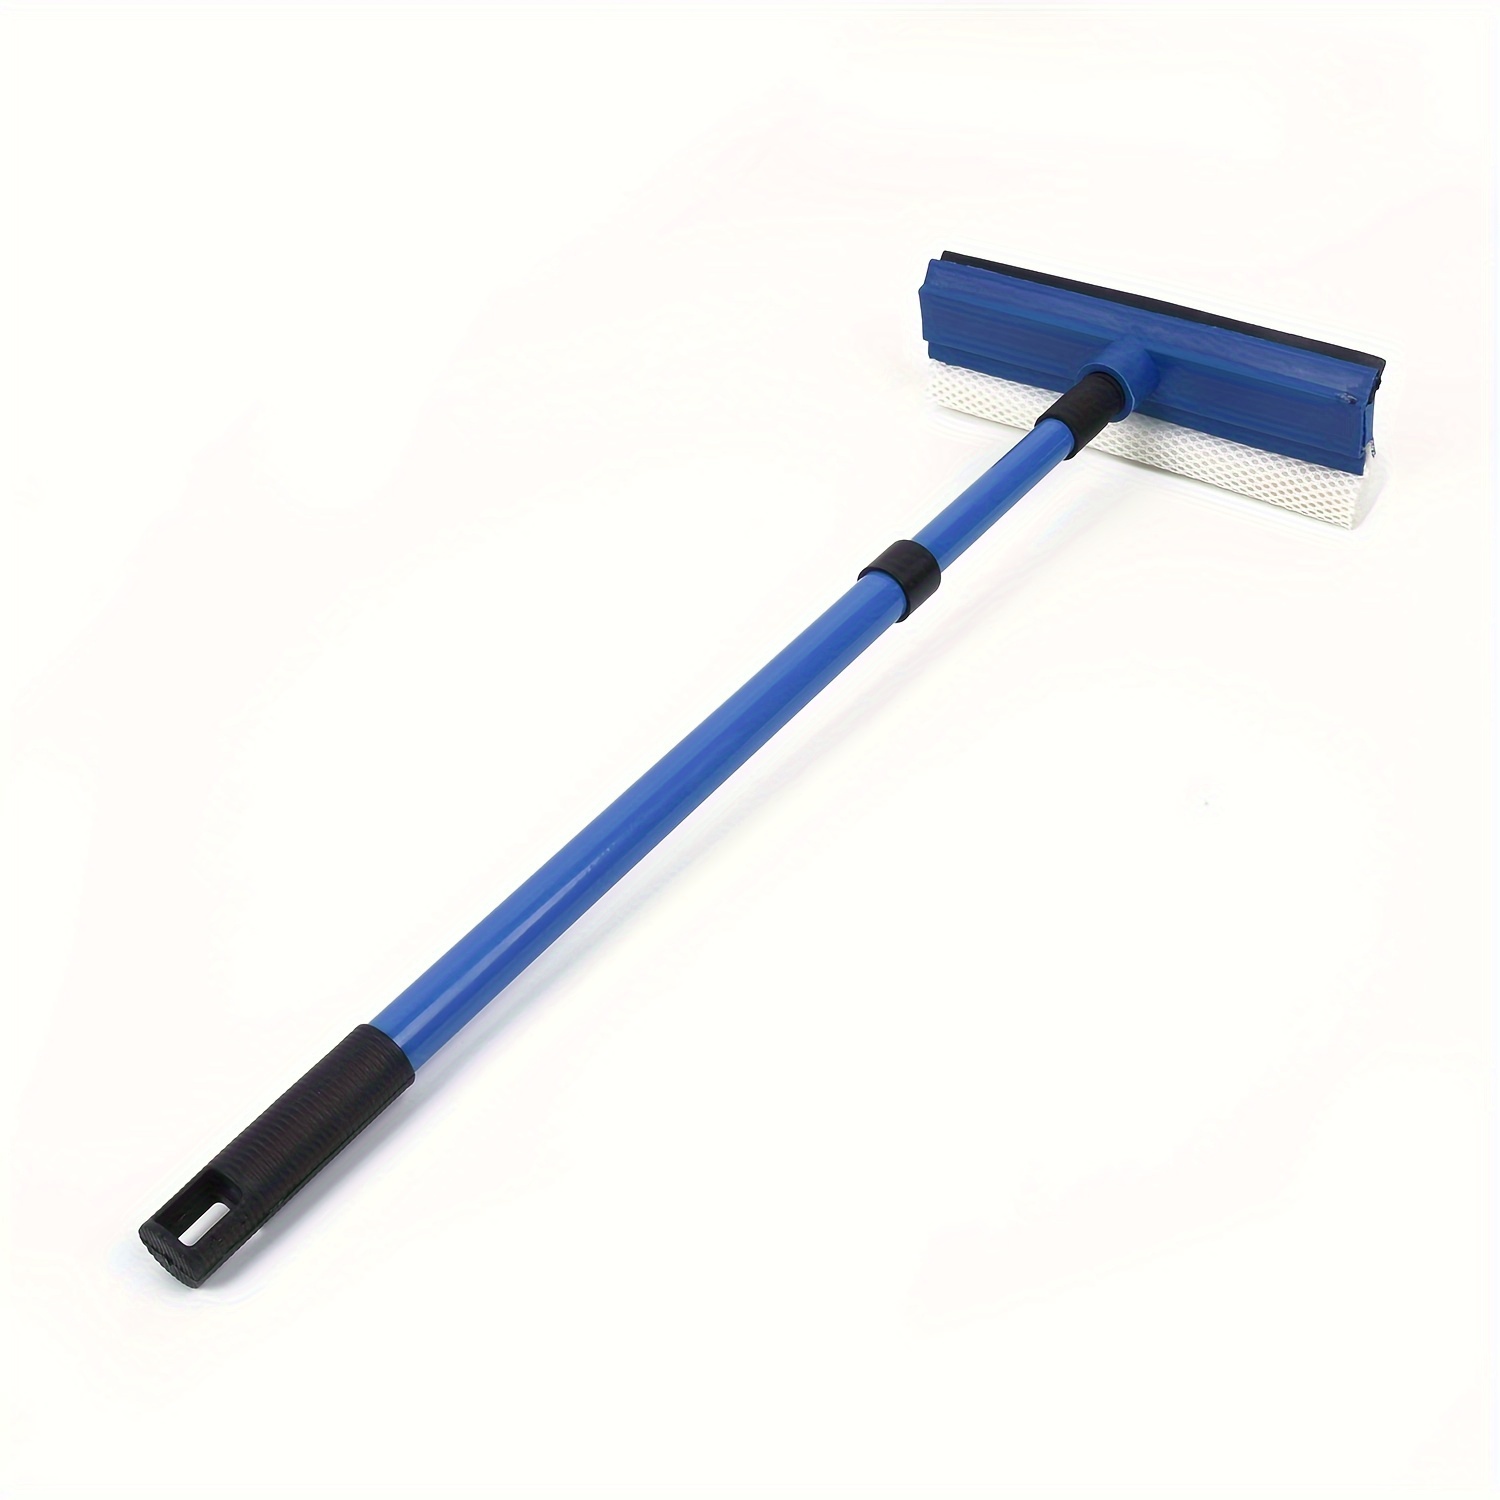 

Extendable Squeegee Window Cleaner - Dual-use, Telescopic Glass Cleaning Tool, Manual Operation, No Electricity Needed, Ideal For Glass Surfaces